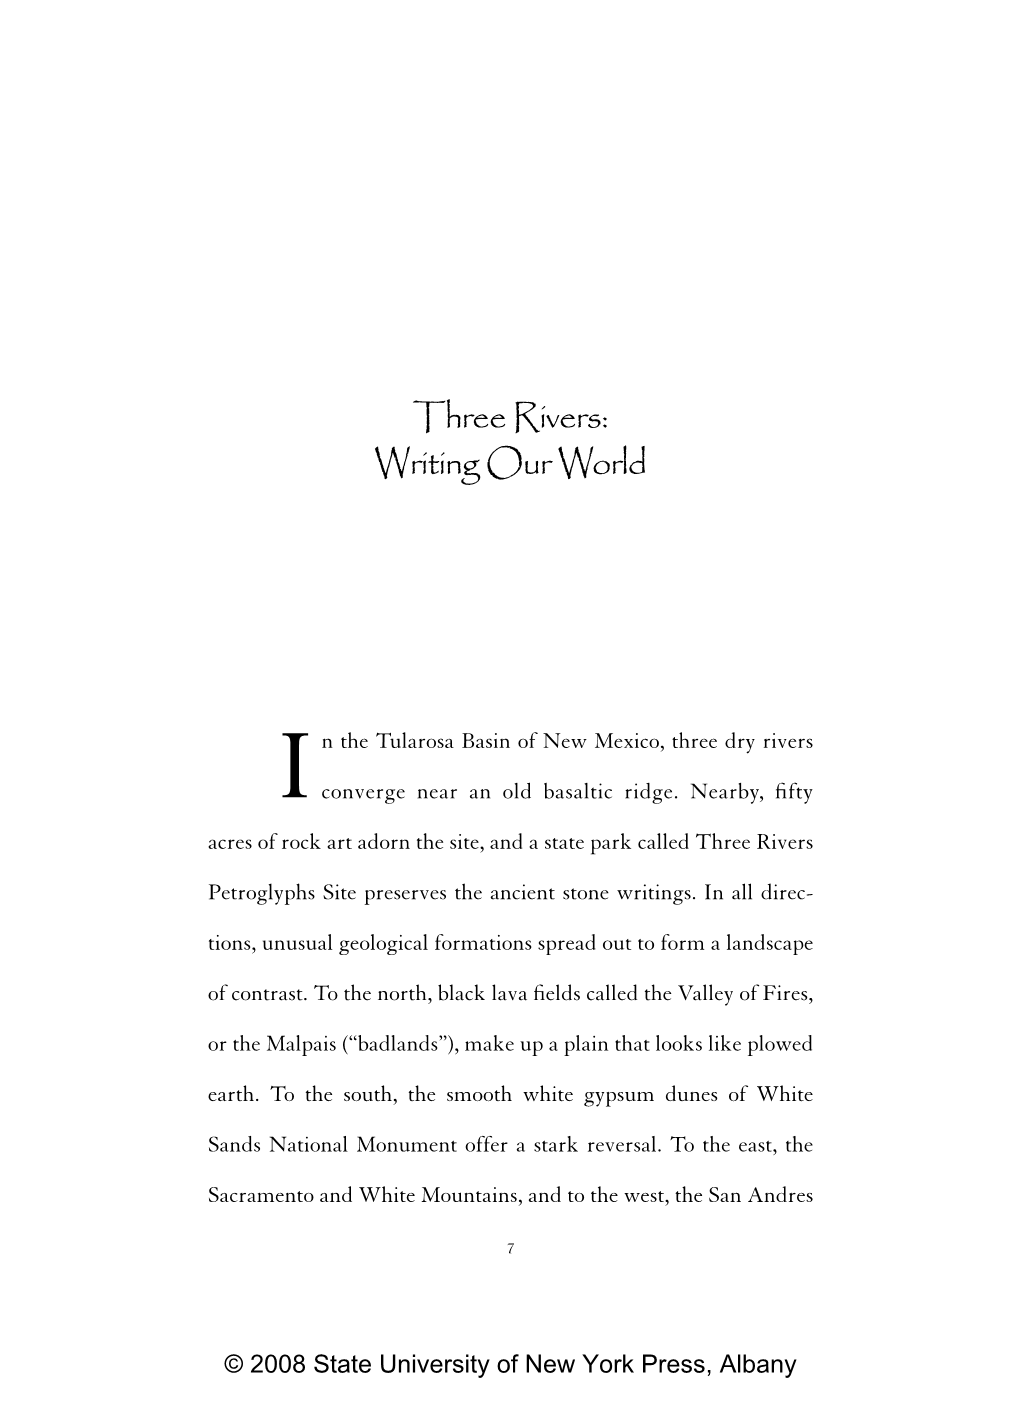 Three Rivers: Writing Our World